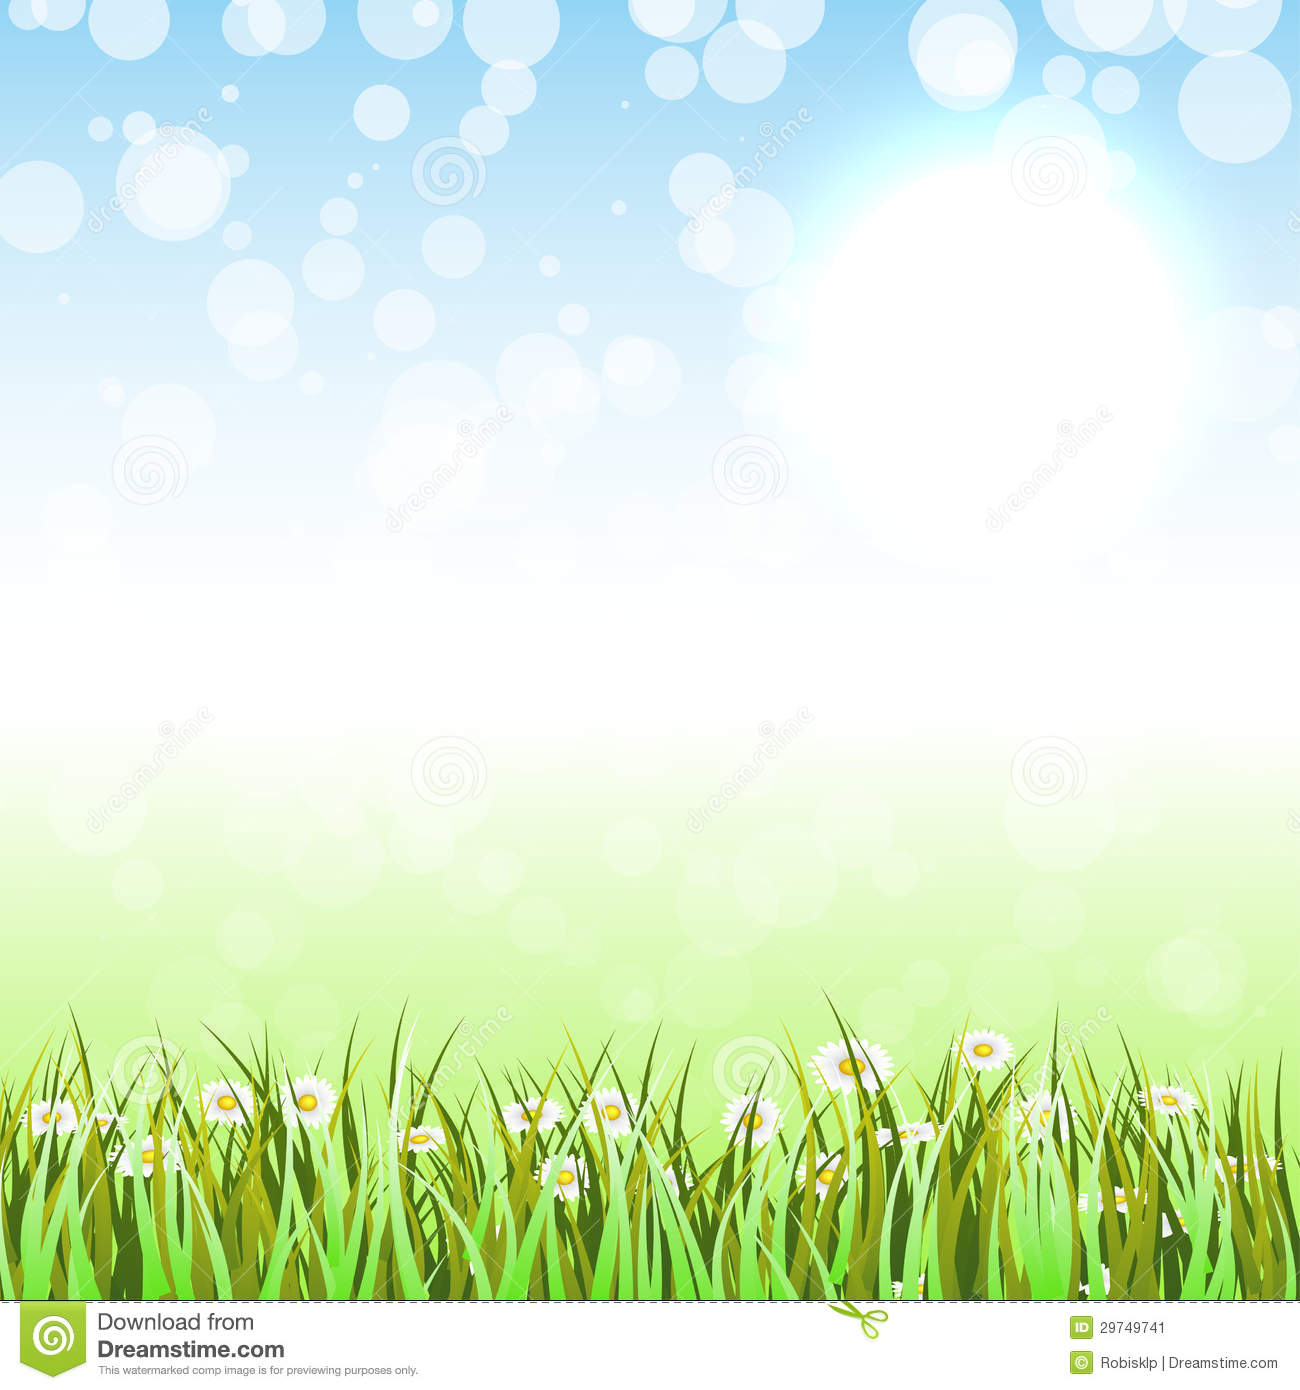 Free download Pics Photos Spring Background Images Spring